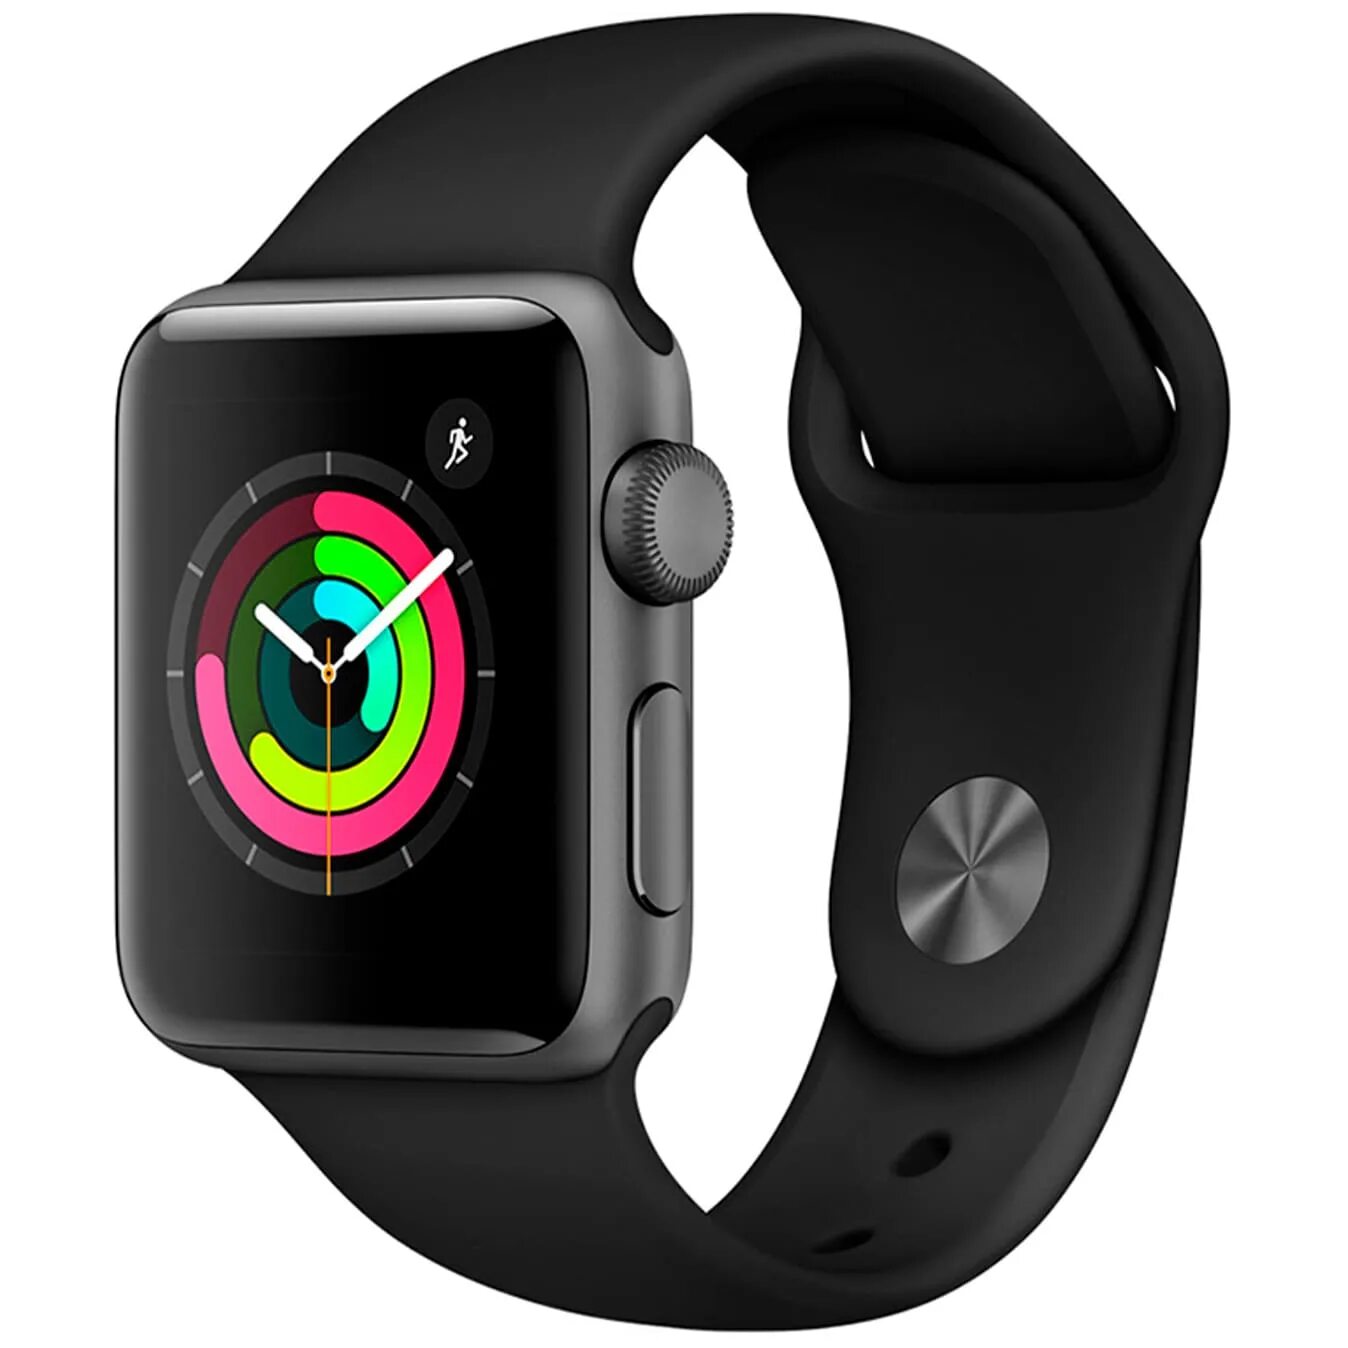 Apple watch s3 38mm Space Gray. Смарт часы Apple watch Series 3 GPS 38mm Space Grey Aluminium Case with Black Sport Band. АПЛ вотч 3 42 мм. Apple watch s3 42mm Space Grey.